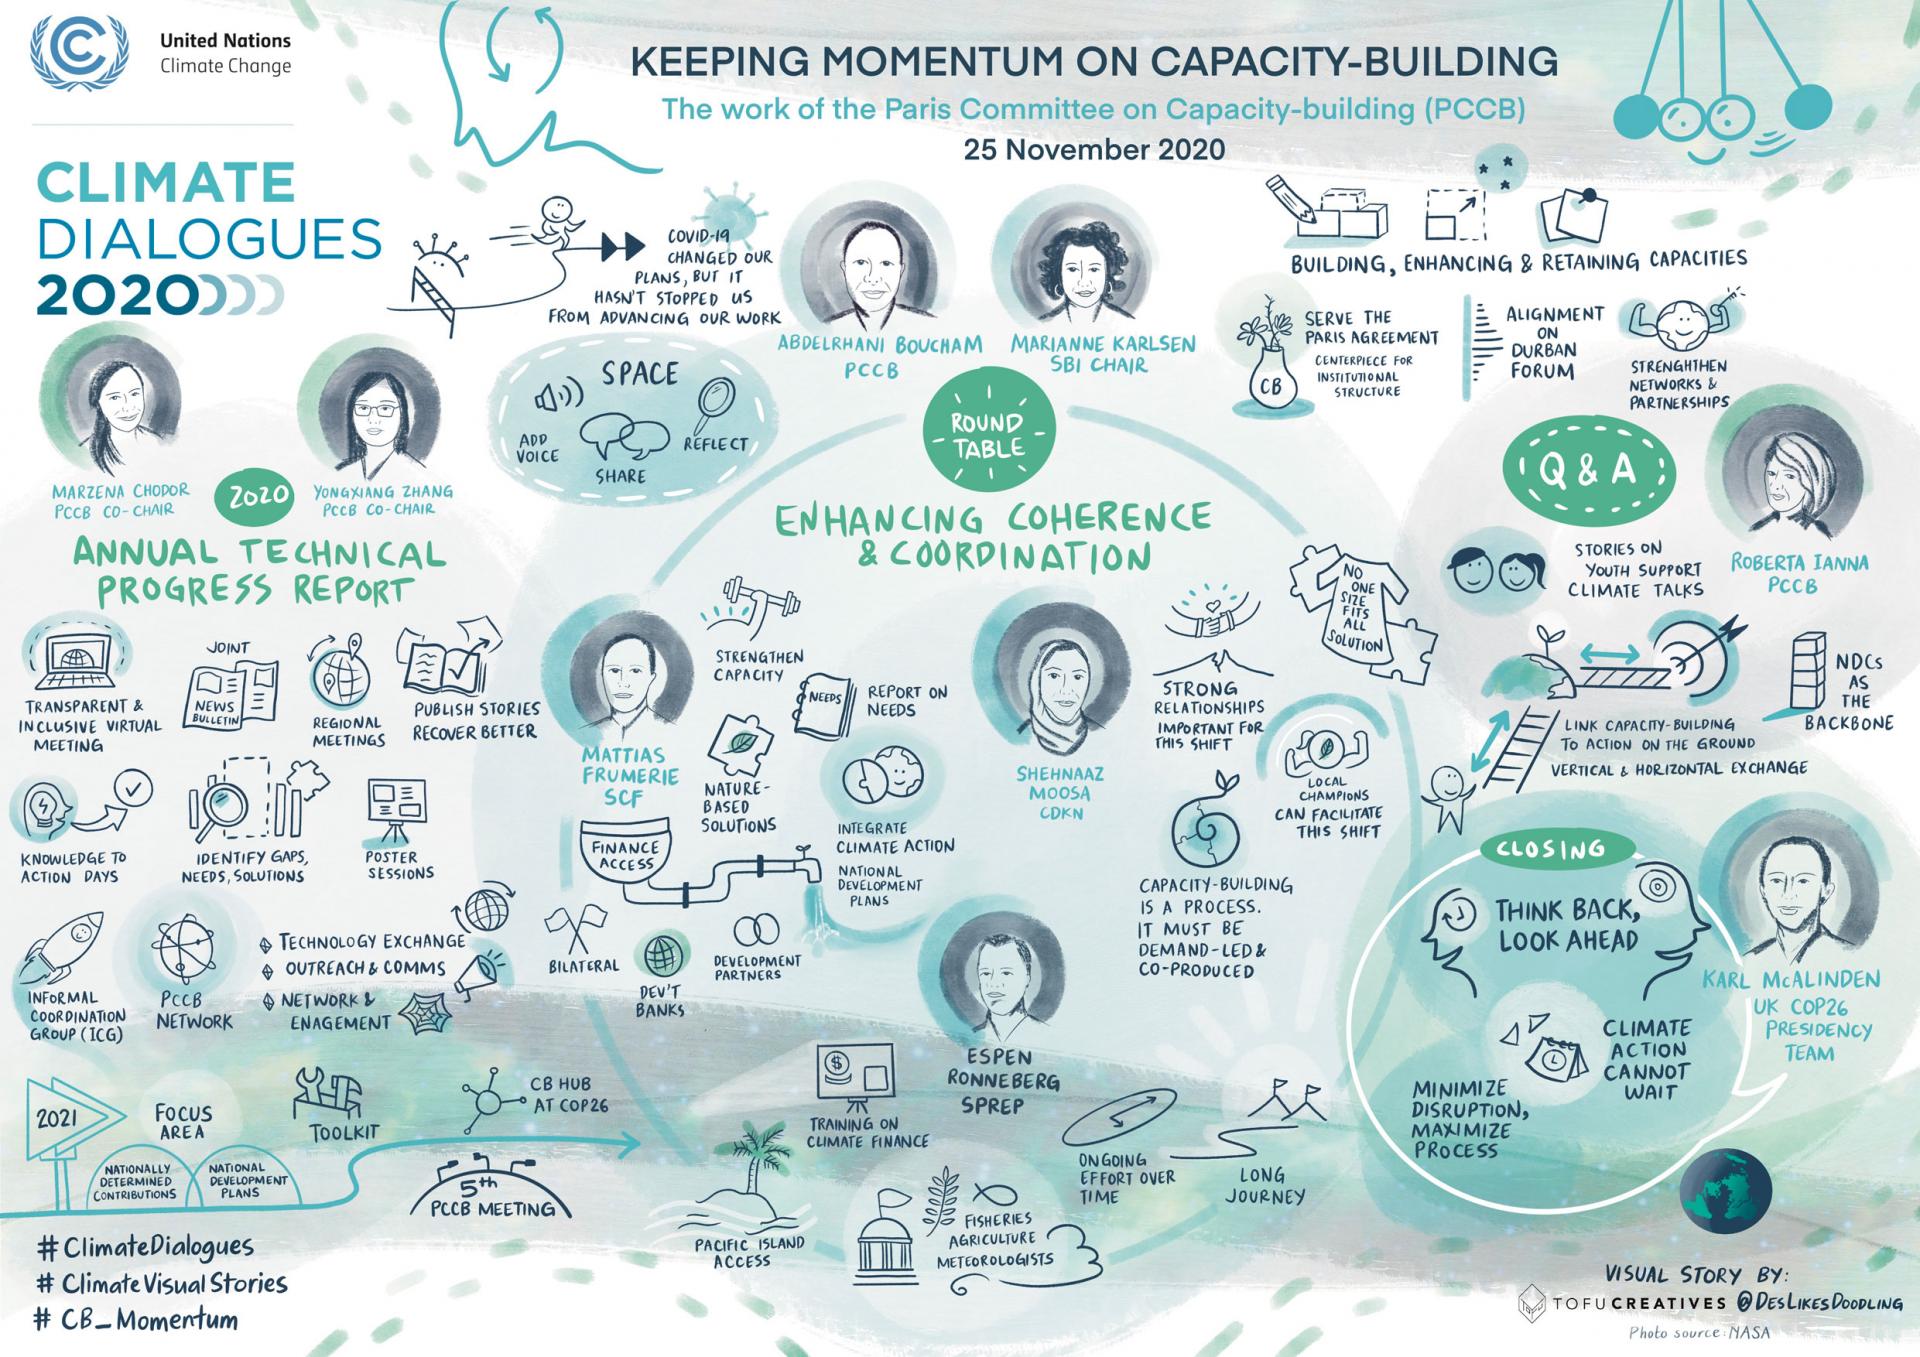 Keeping momentum on capacity-building - the work of the Paris Committee on Capacity-building in 2020